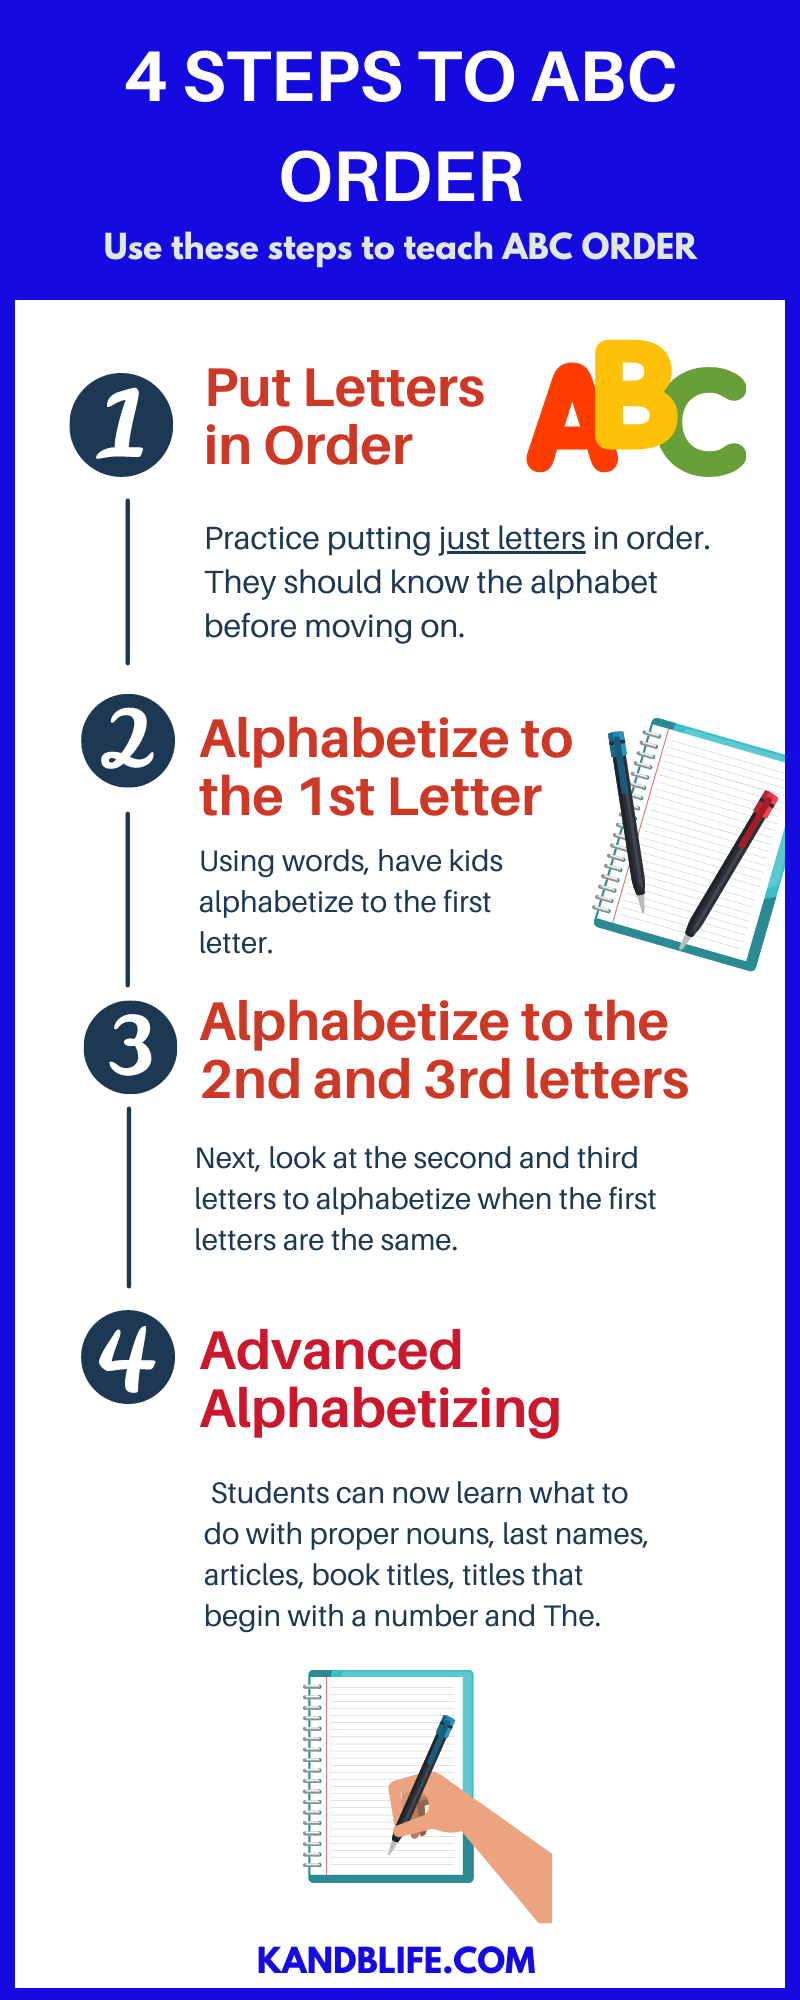 4 Steps Graphic for Teaching ABC Order